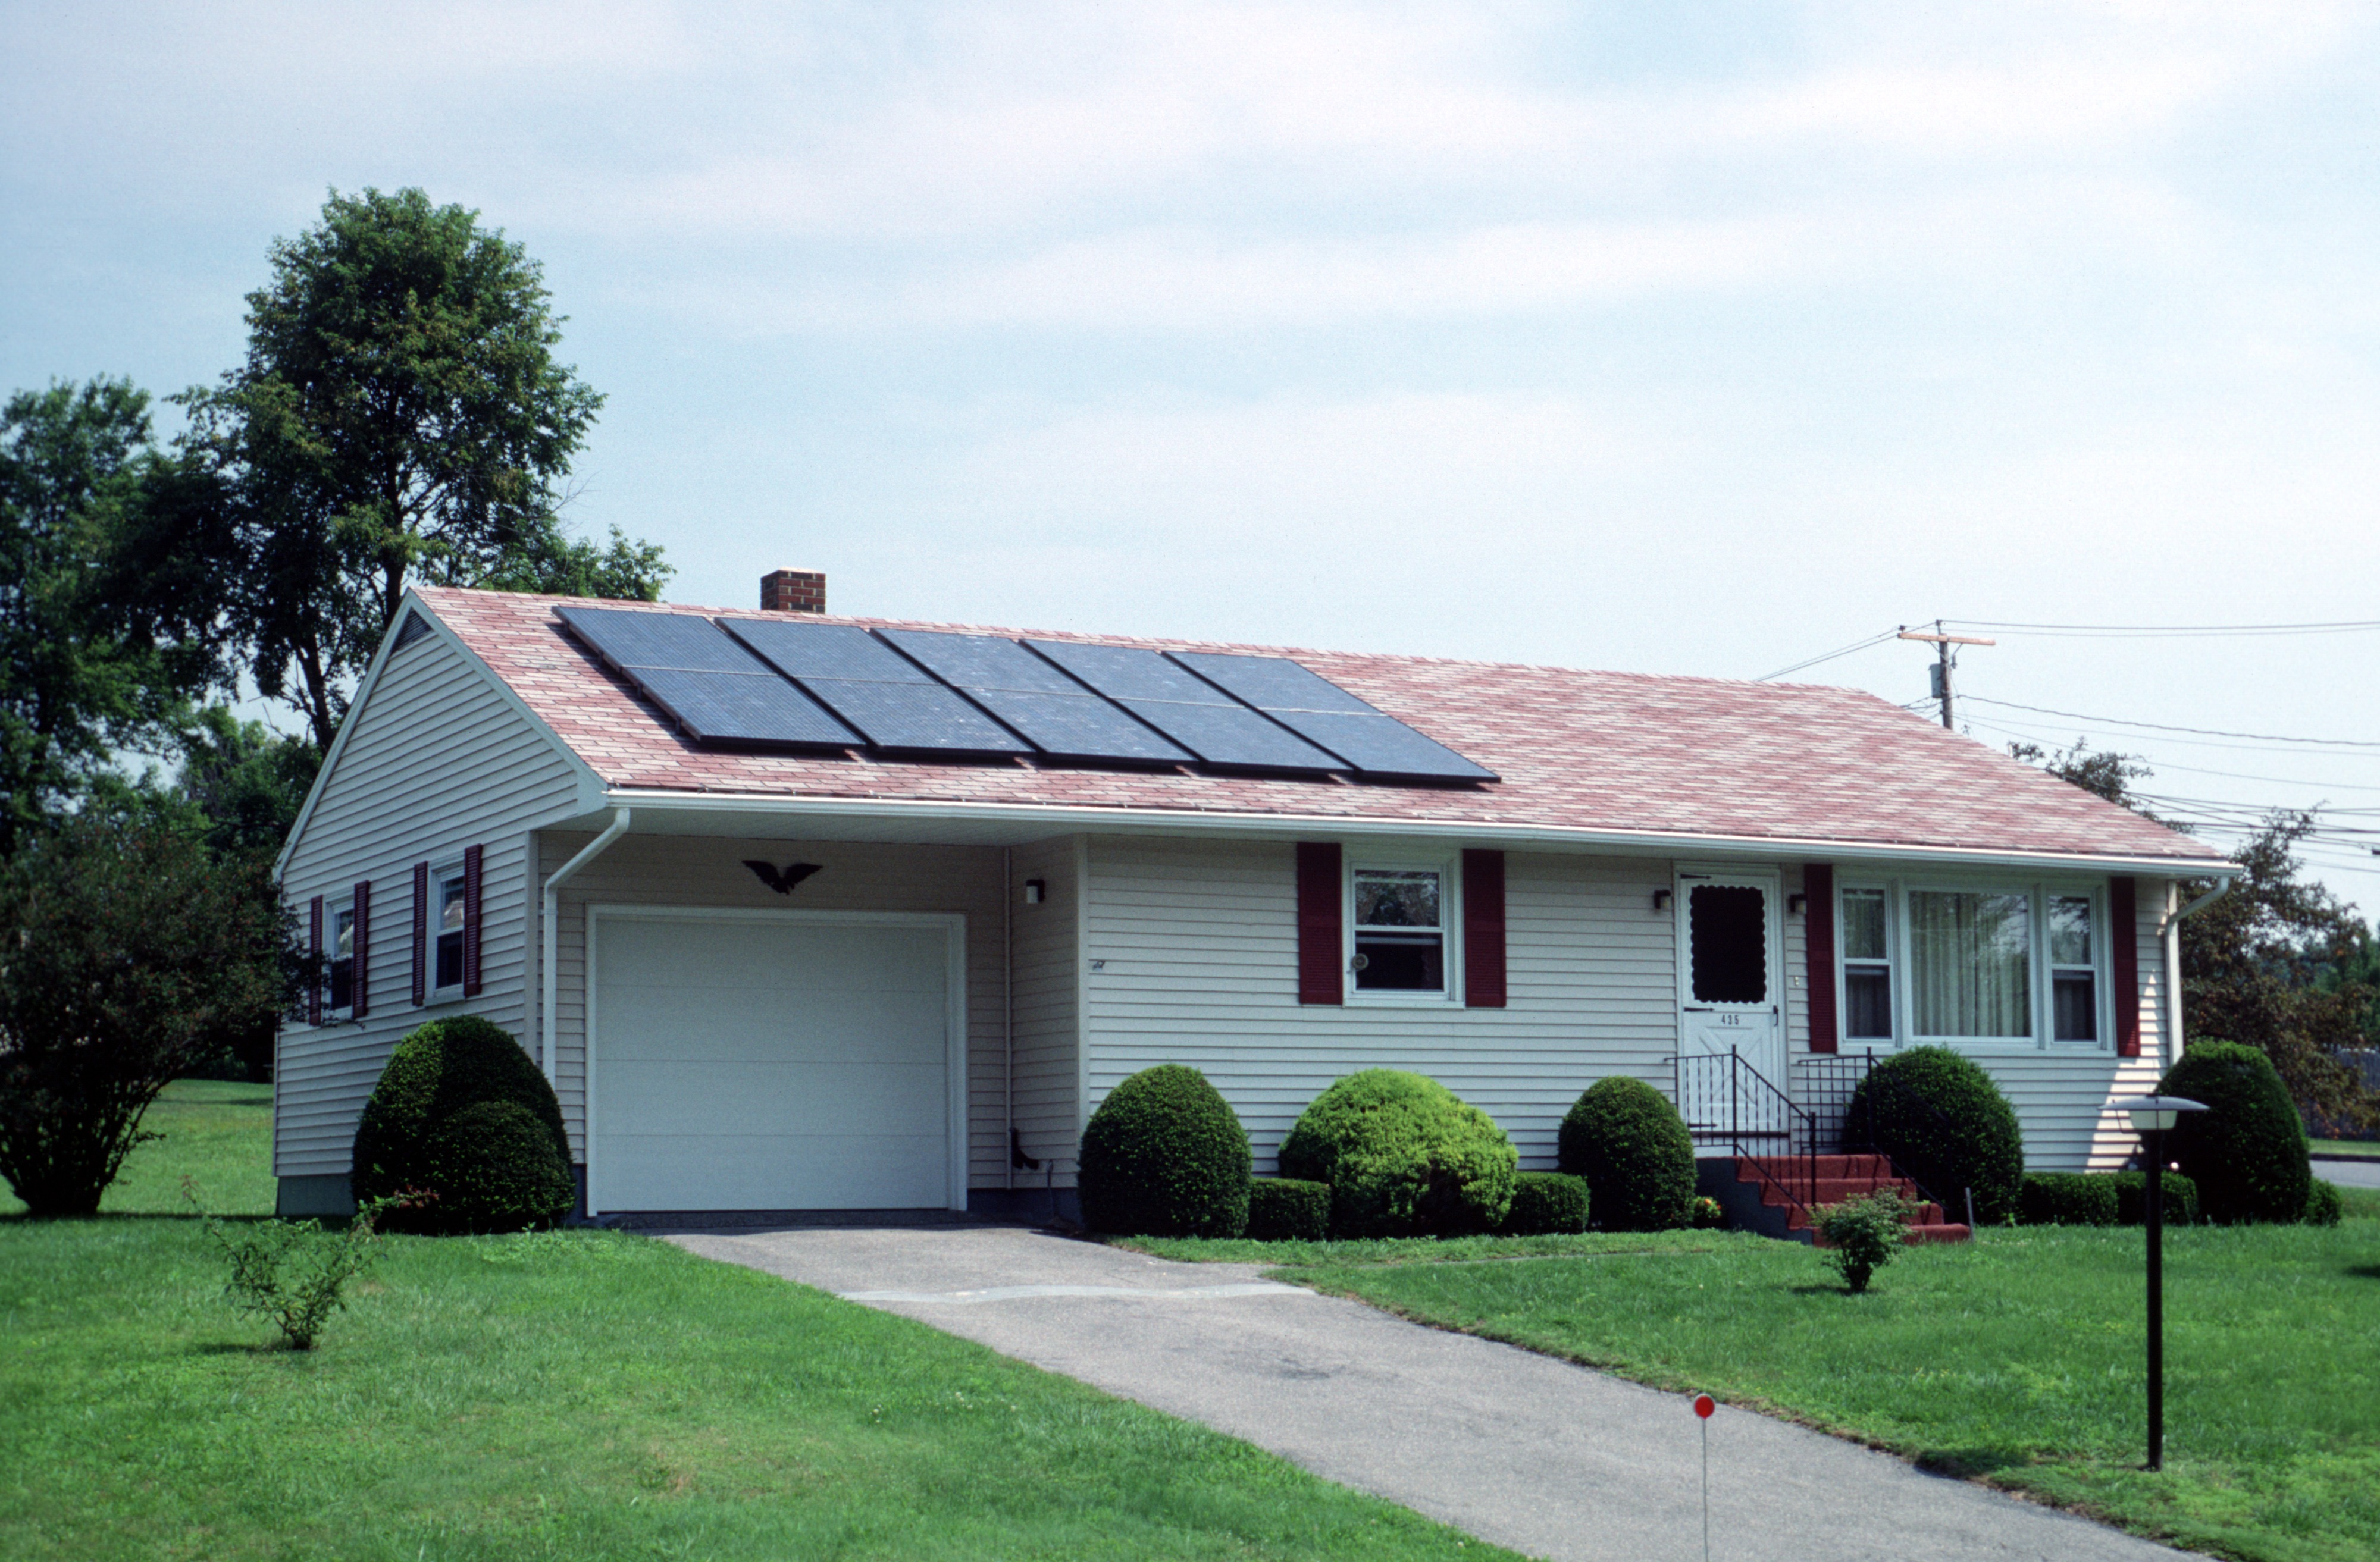 Image of a solar photovoltaic system on the roof of a house.